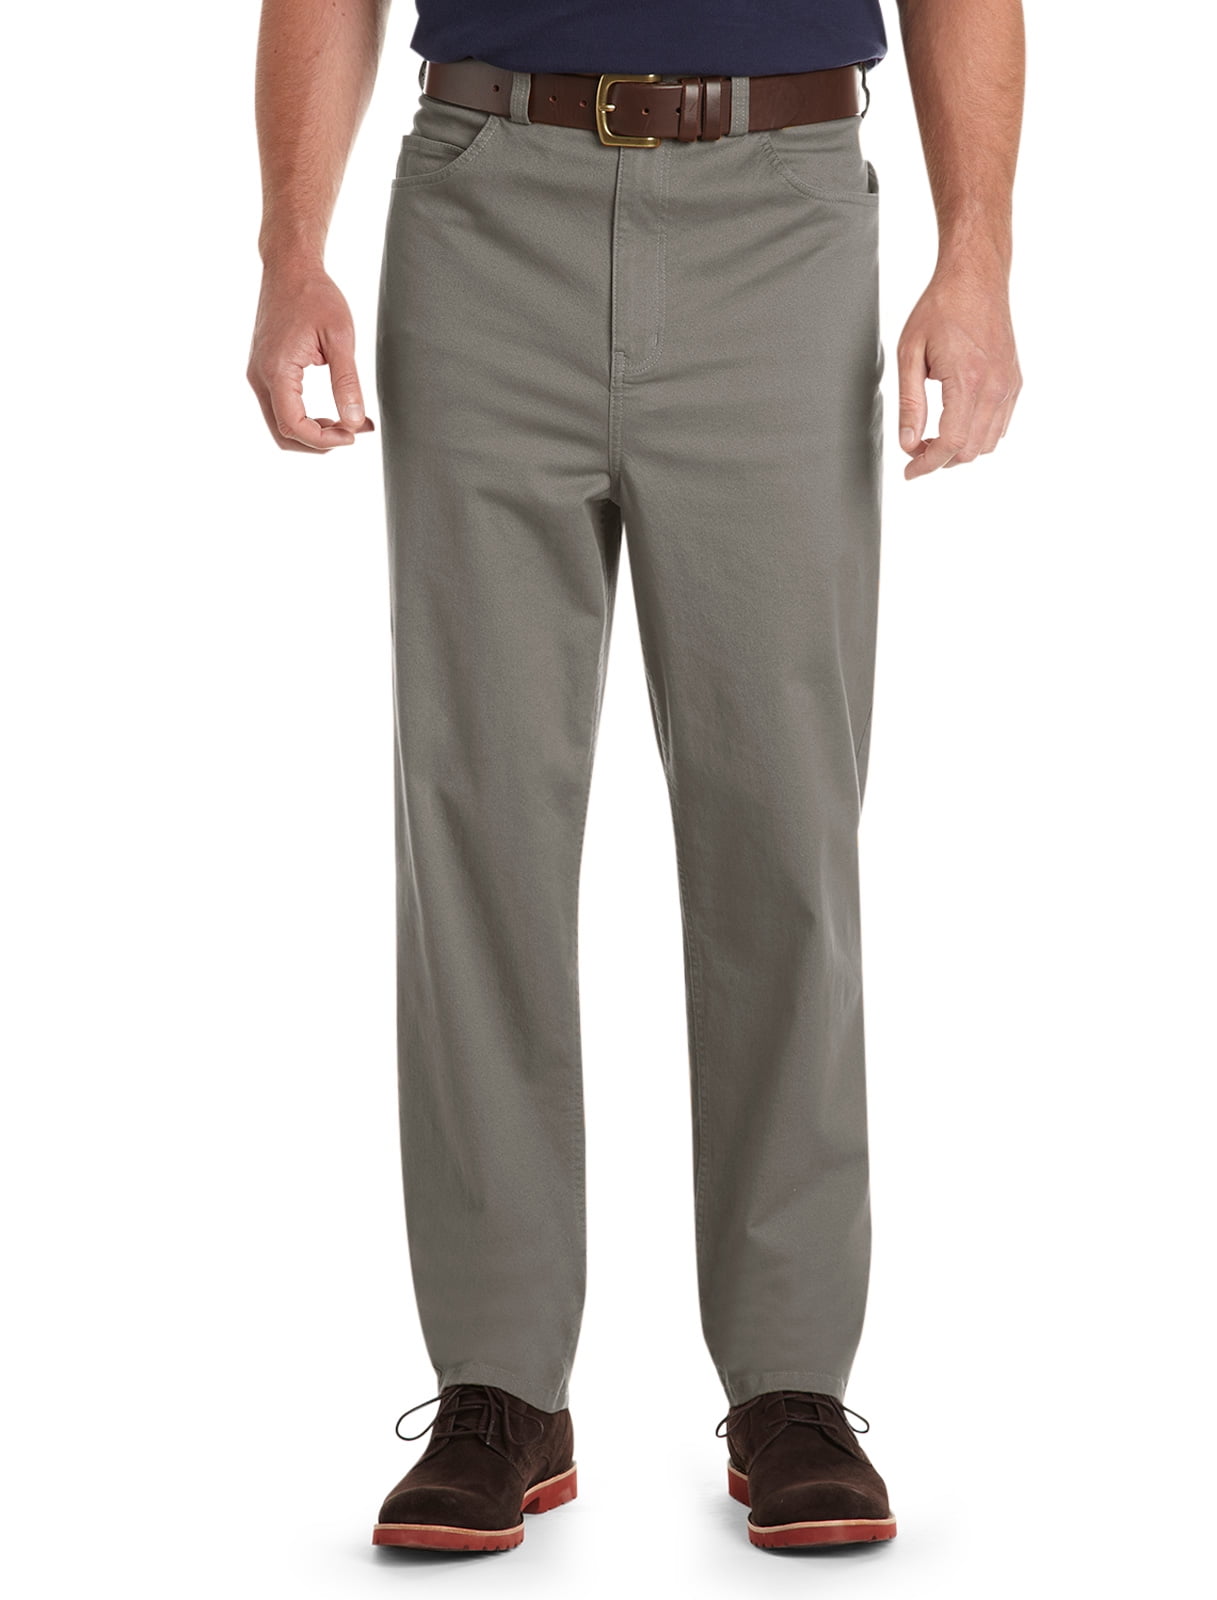 Harbor Bay by DXL Big and Tall Continuous Comfort Pants 